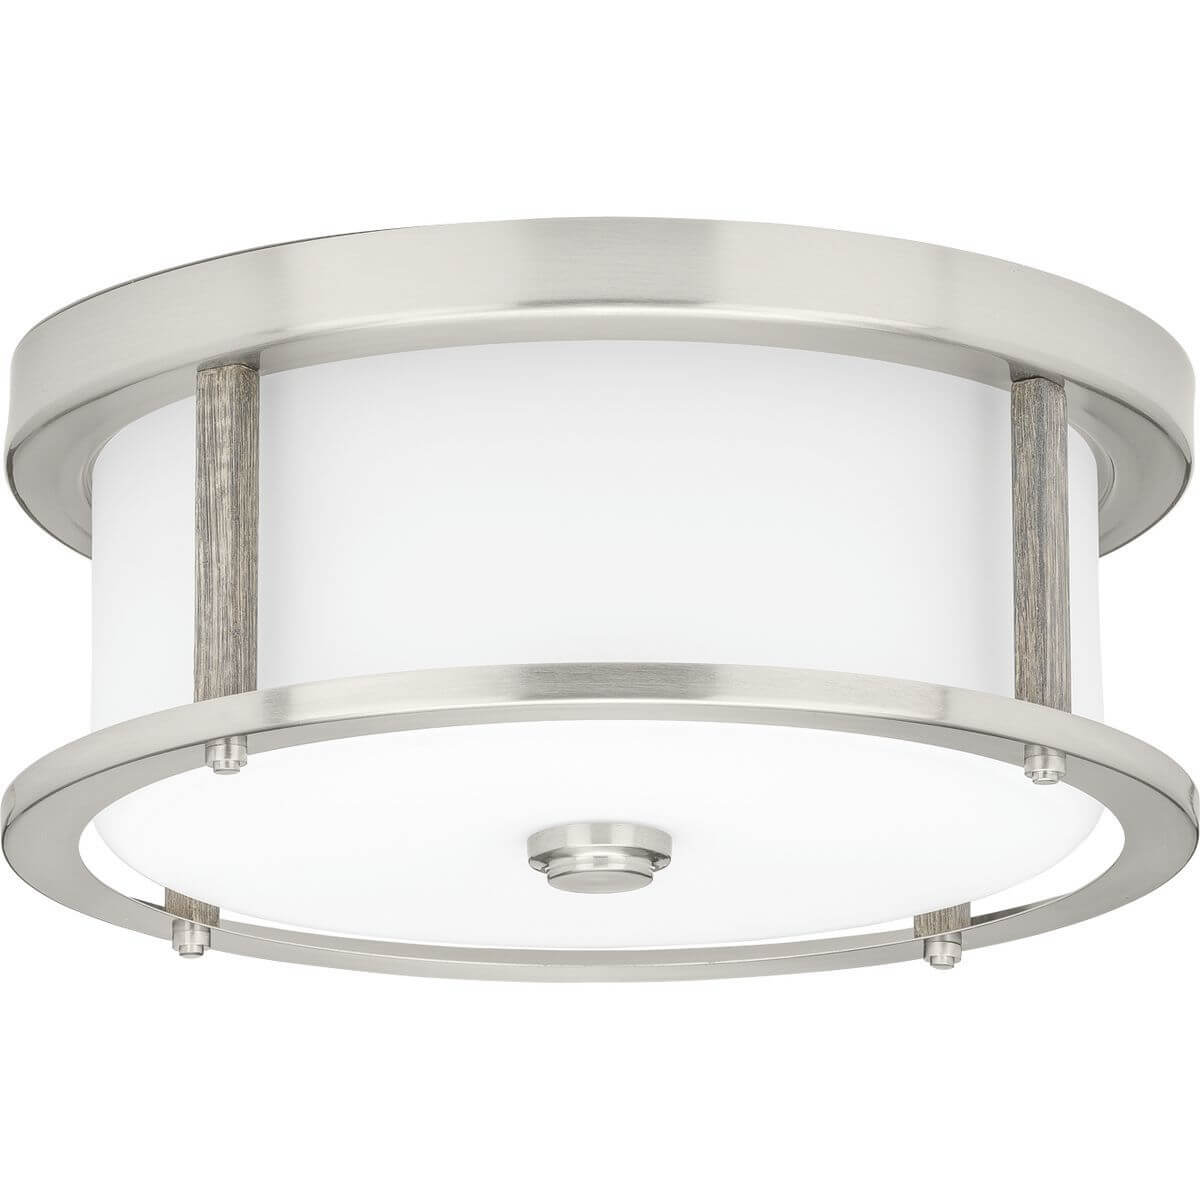 Progress Lighting Mast 2 Light 13 inch Flush Mount in Brushed Nickel with Clear and Etched White Glass P350144-009